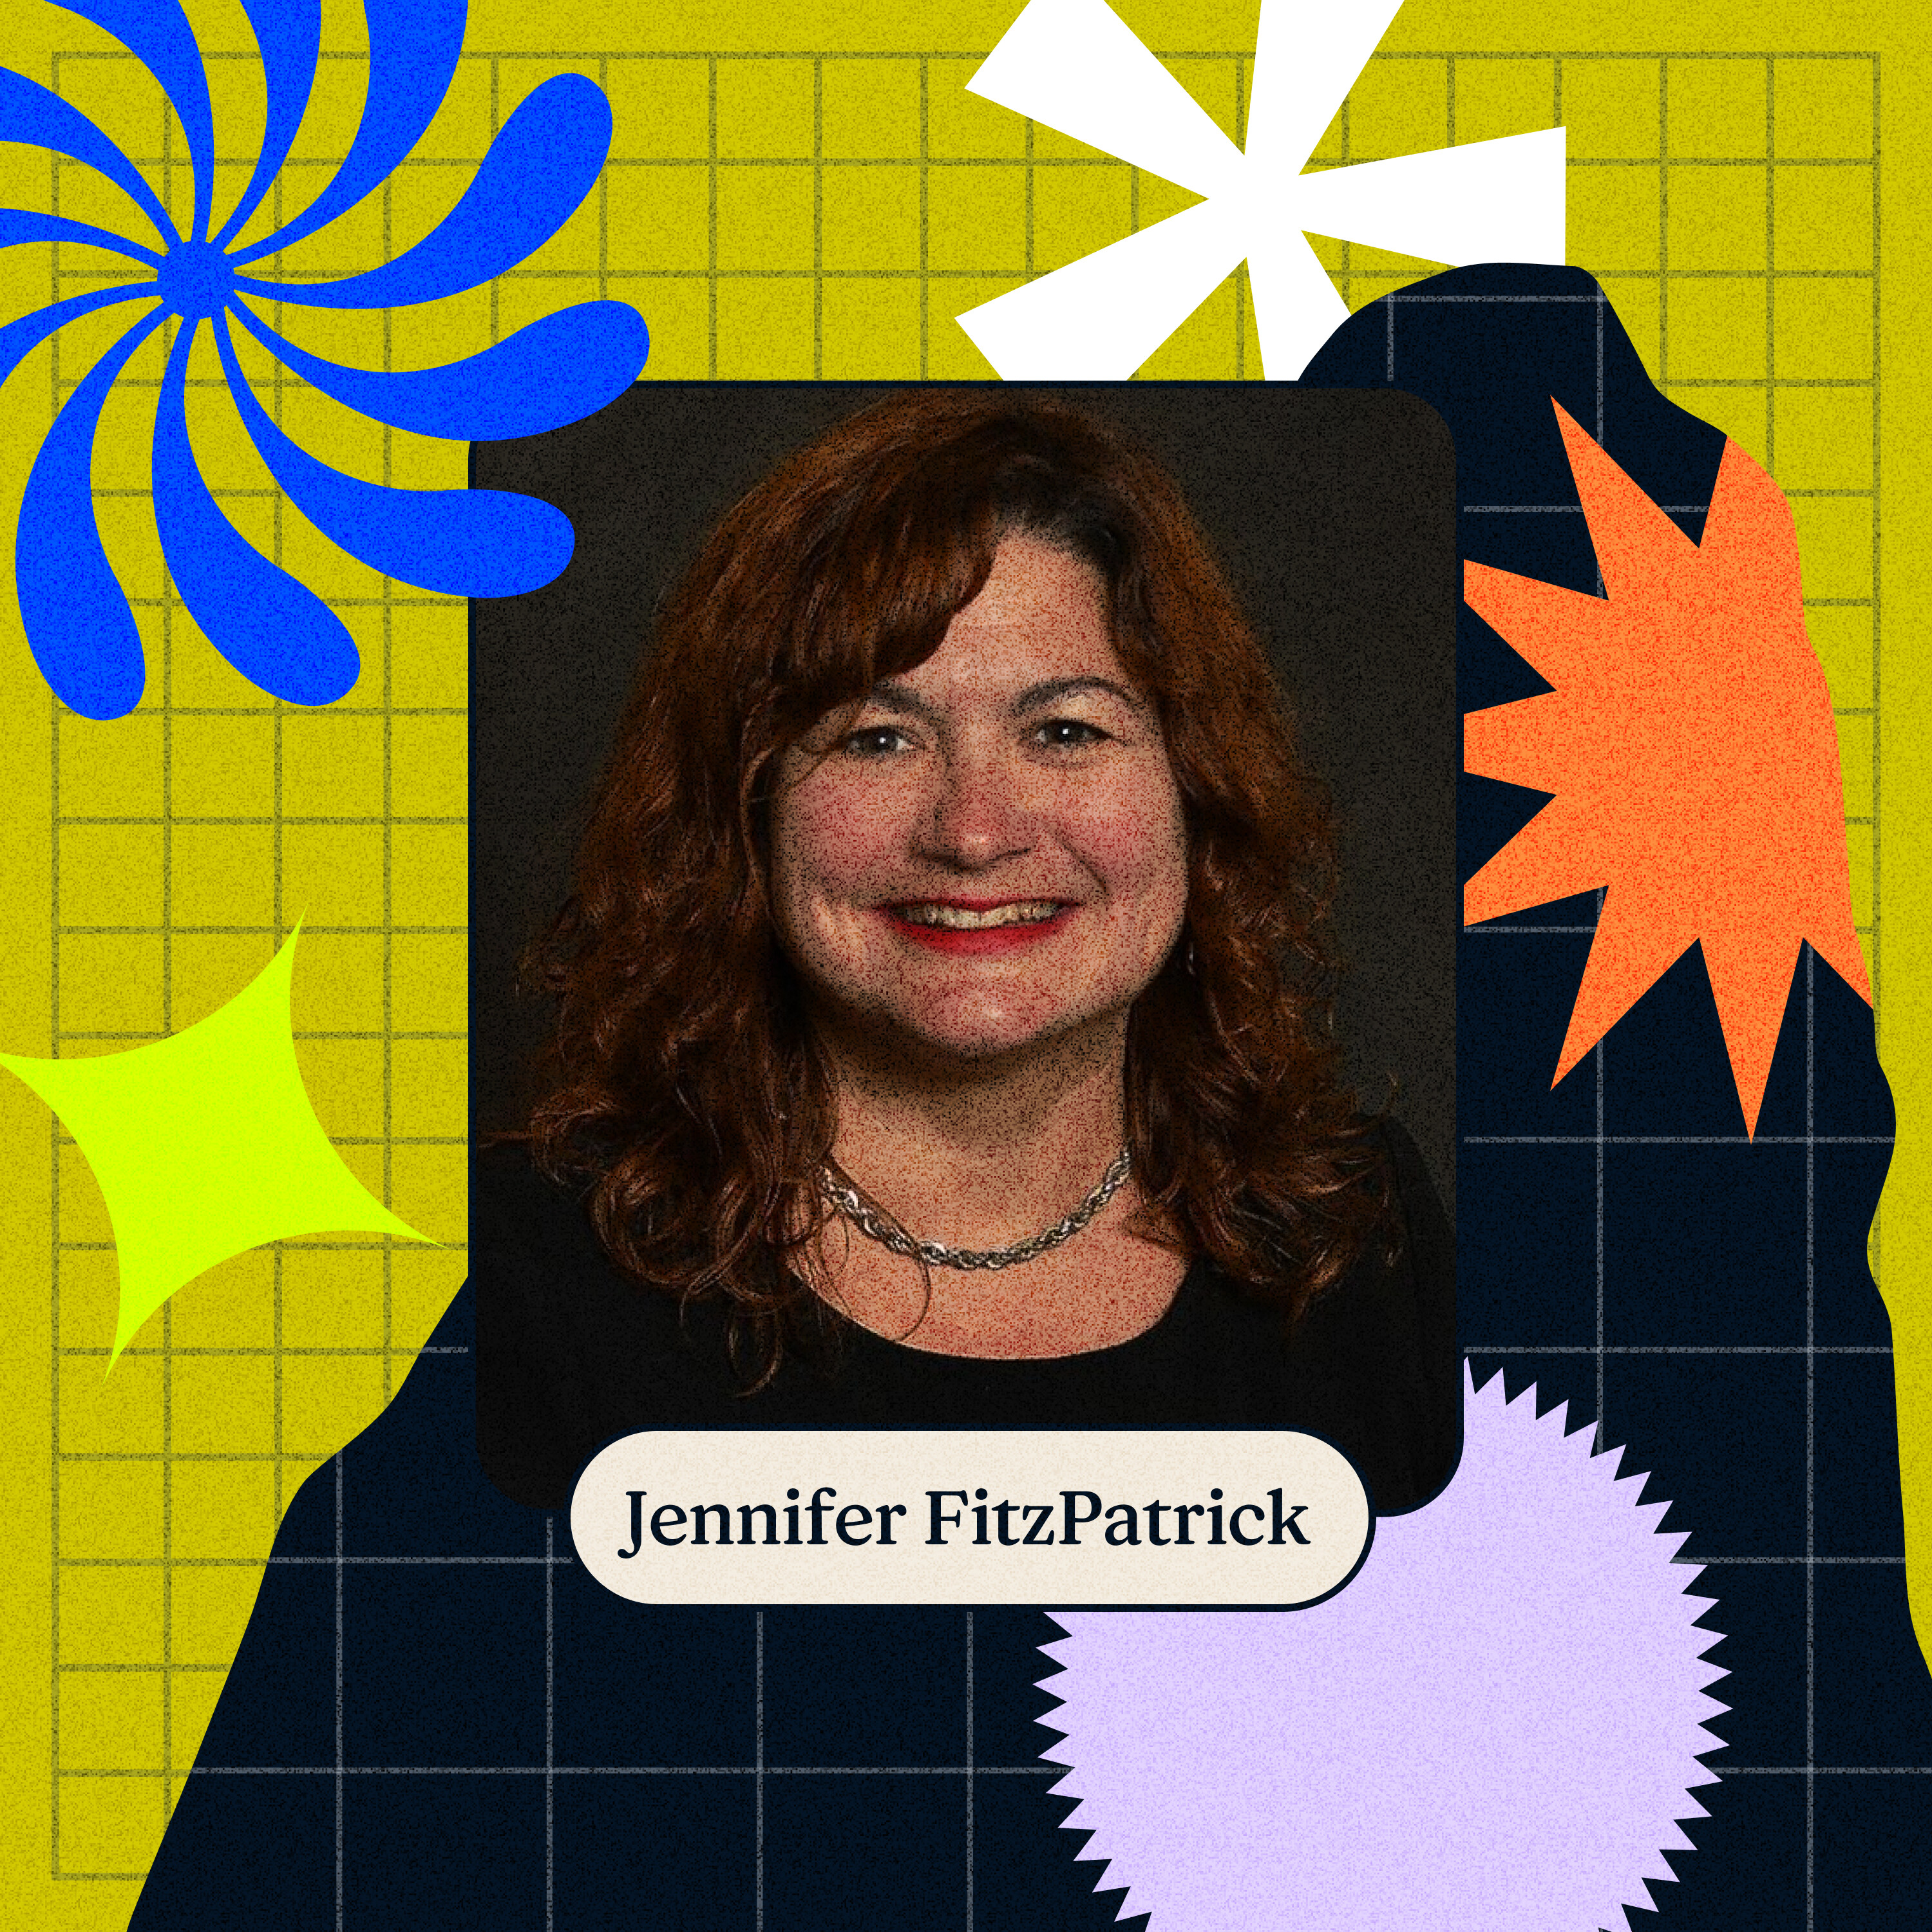 Transforming customer service in healthcare, with health educator Jennifer FitzPatrick